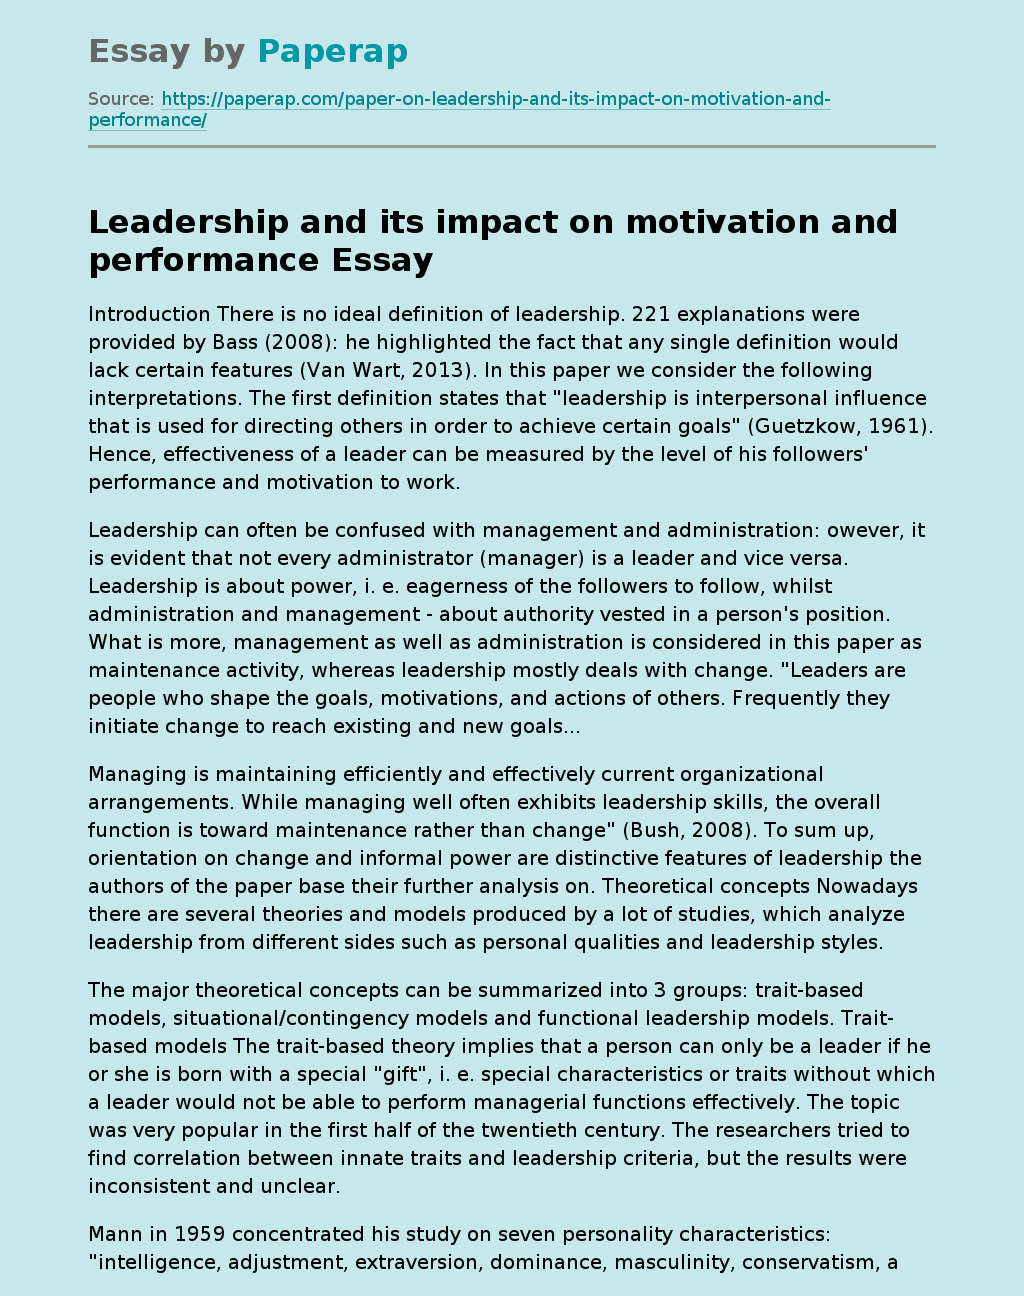 Leadership and its impact on motivation and performance